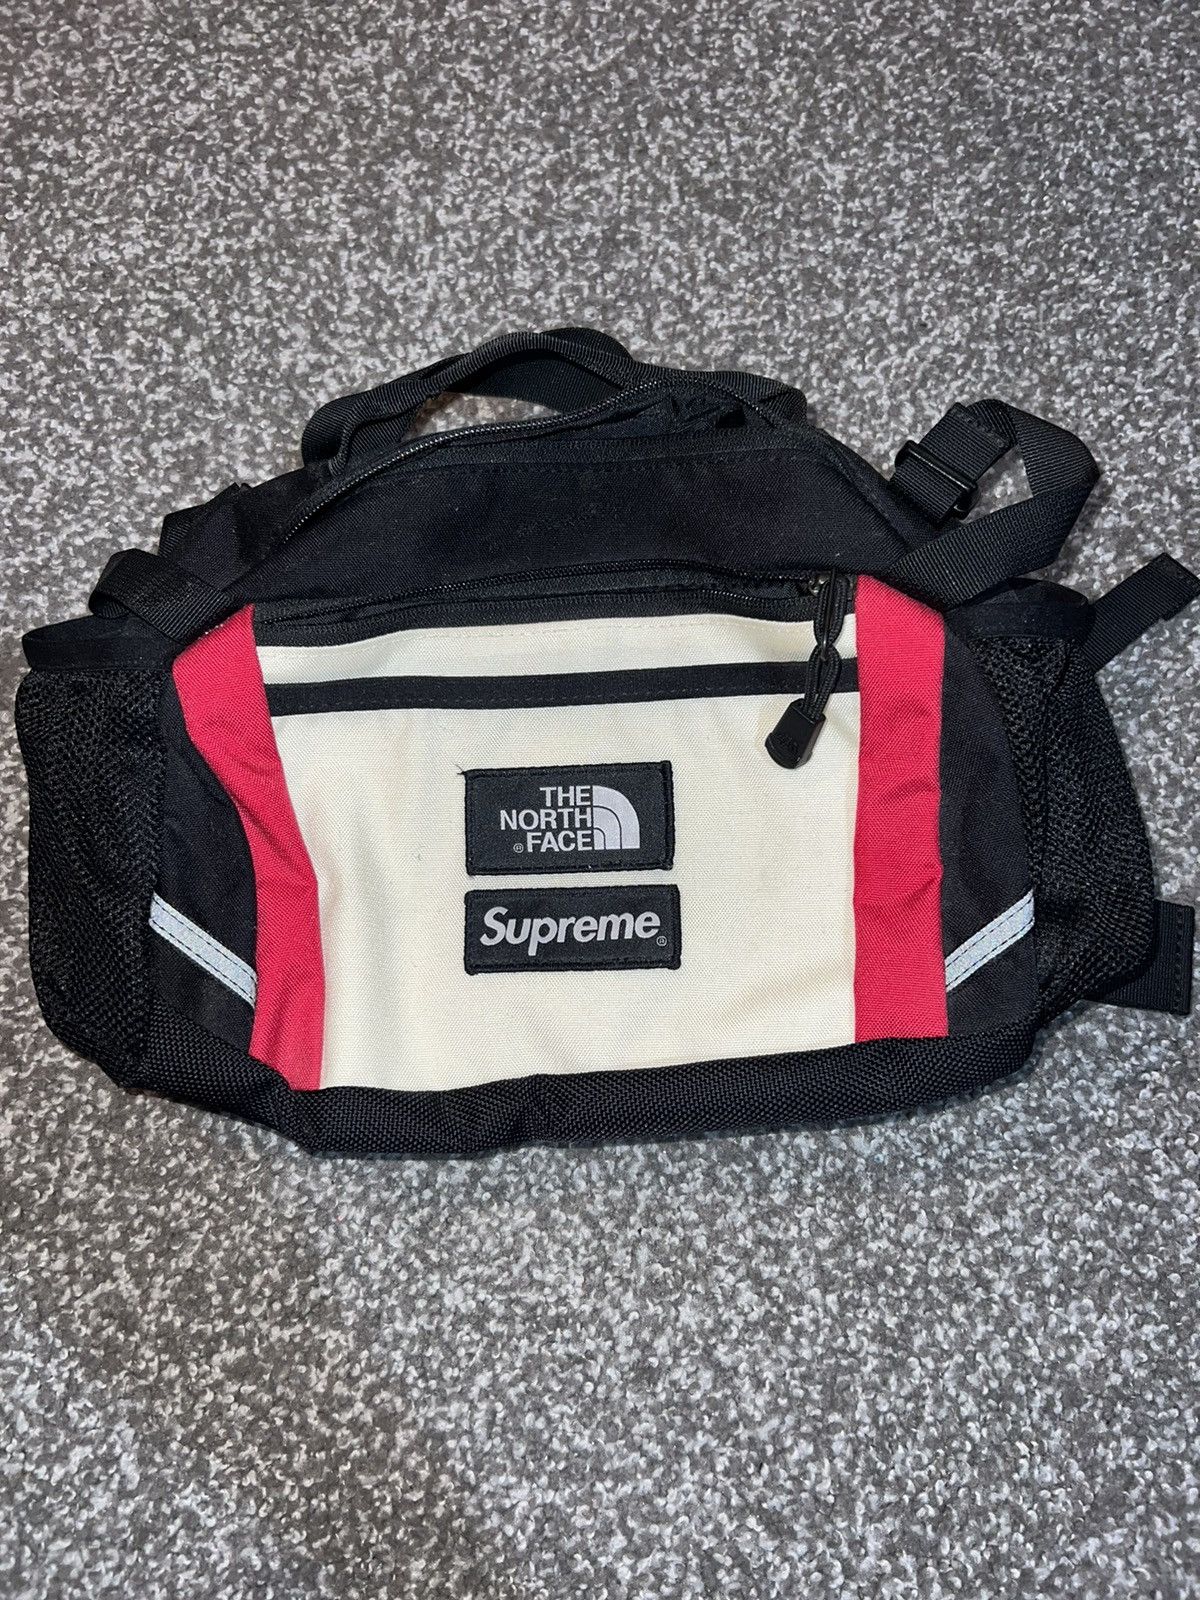 Supreme Supreme the north face expedition waist bag | Grailed